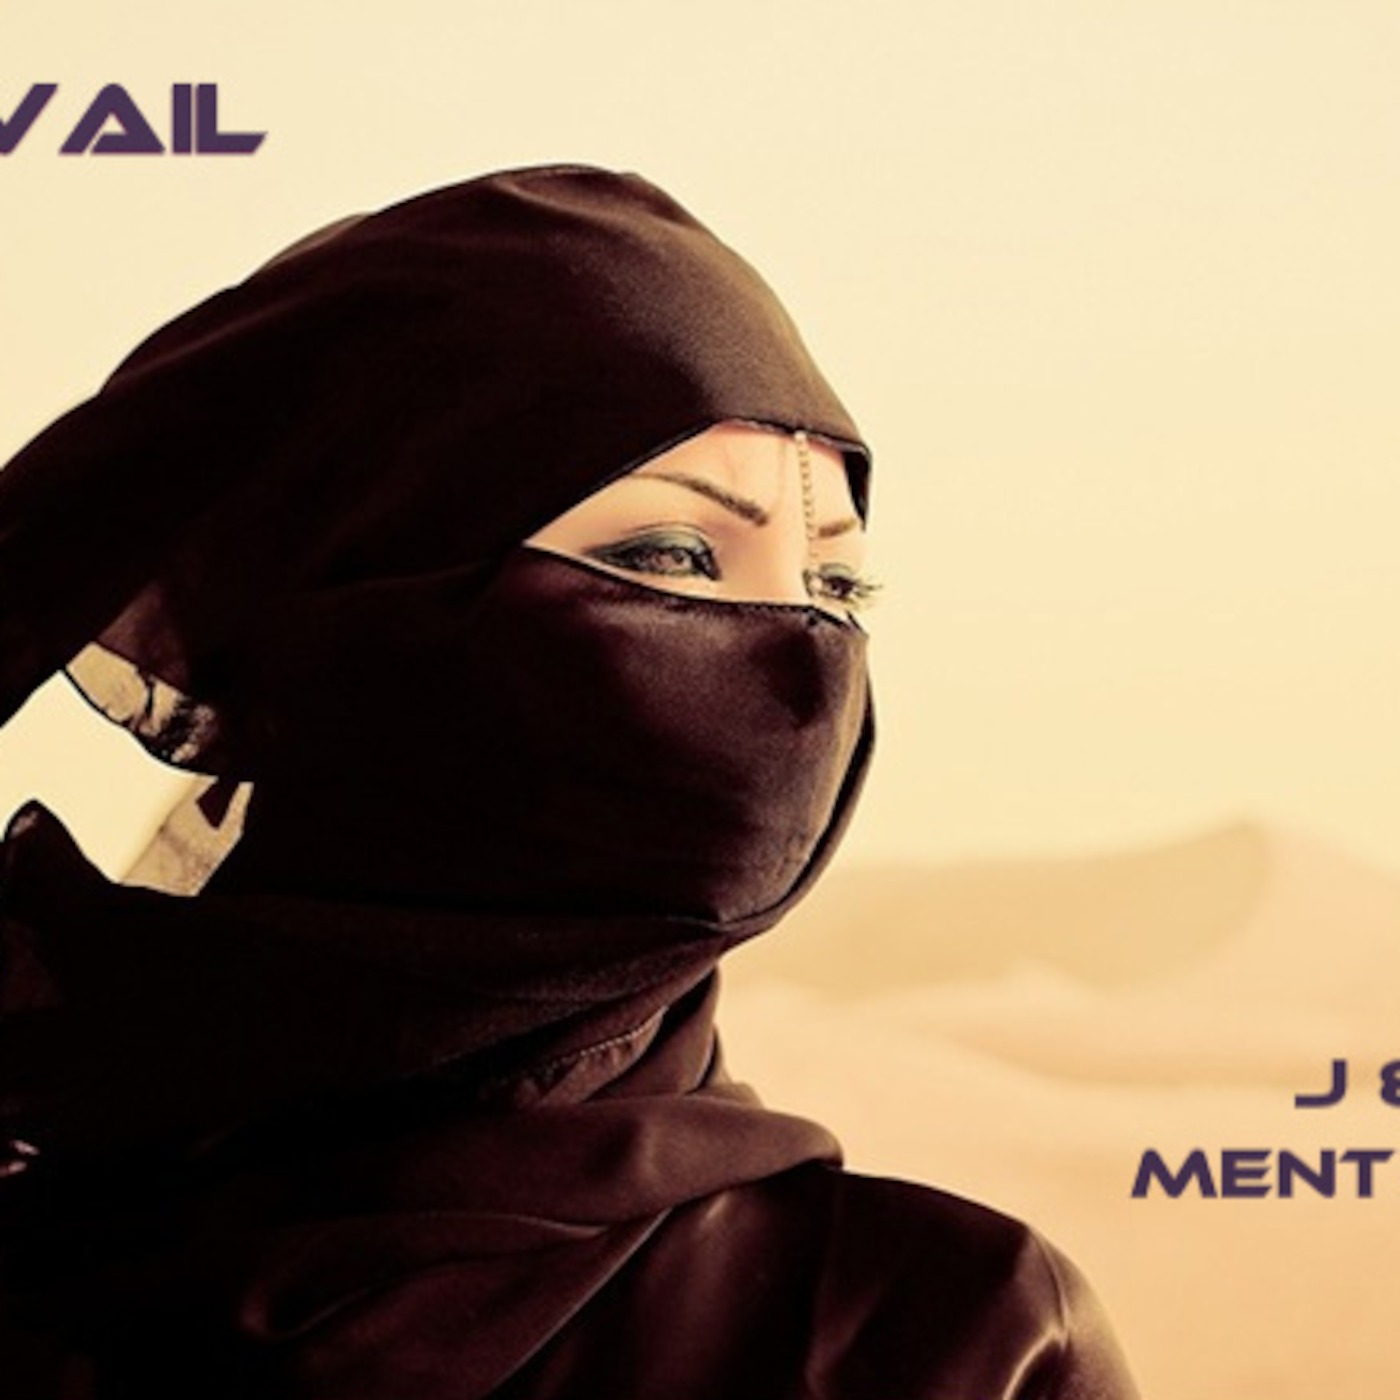 PREVAIL mixed by J & D Mentxaka